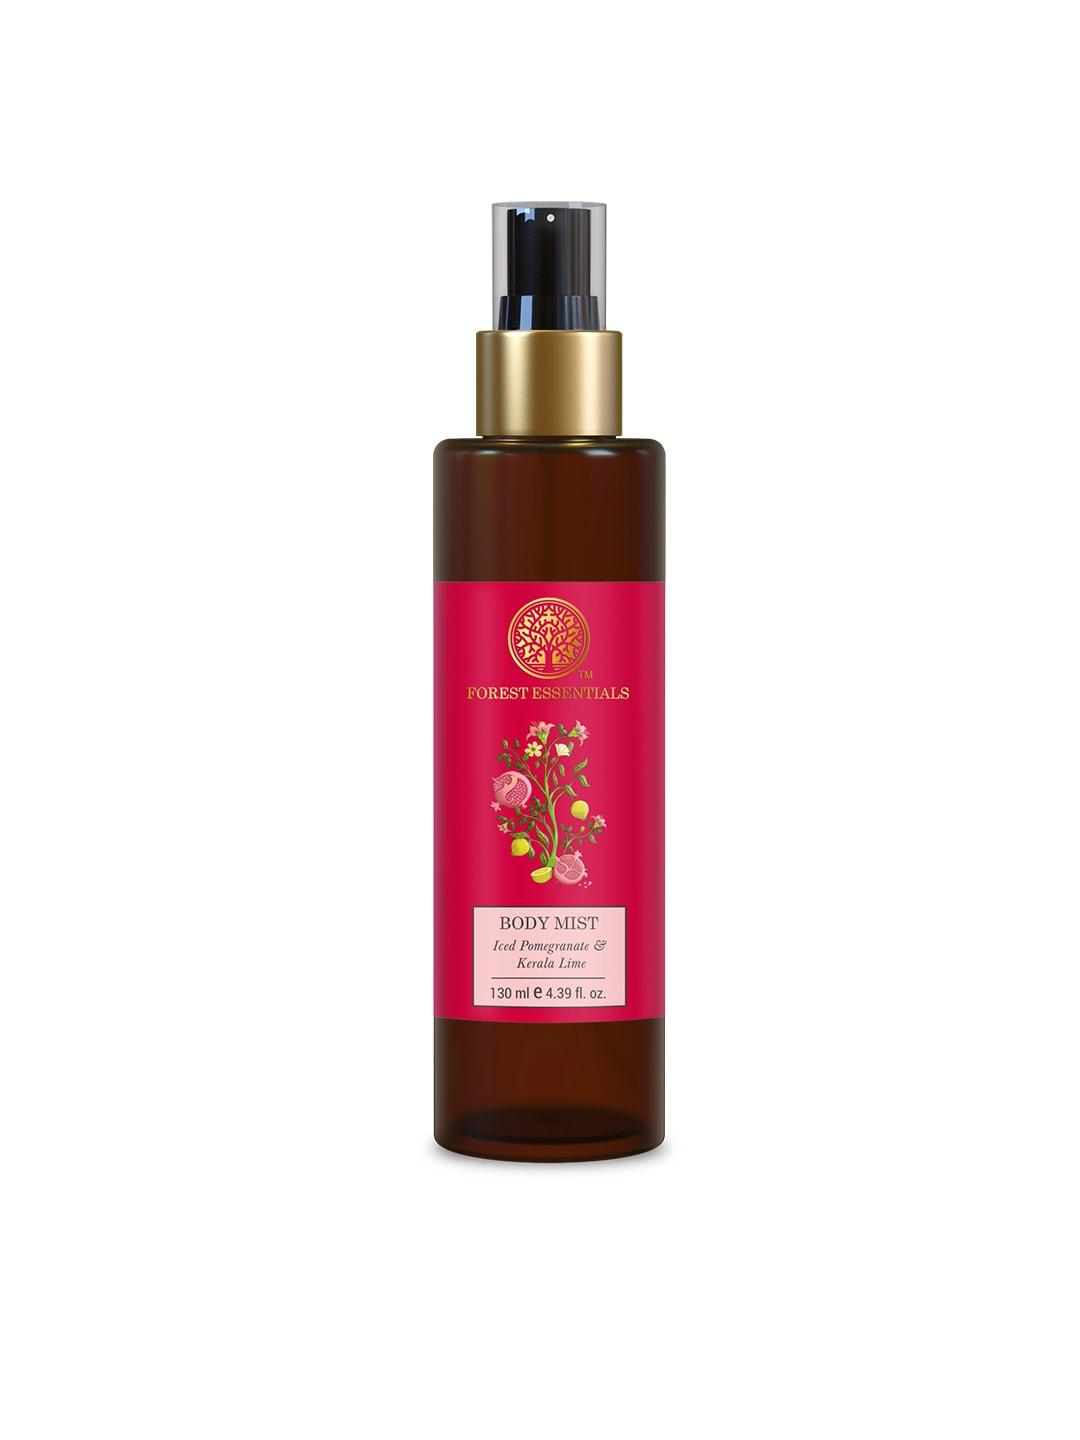 Forest Essentials Hydrating Body Mist Iced Pomegranate & Kerala Lime Spray - 130ml